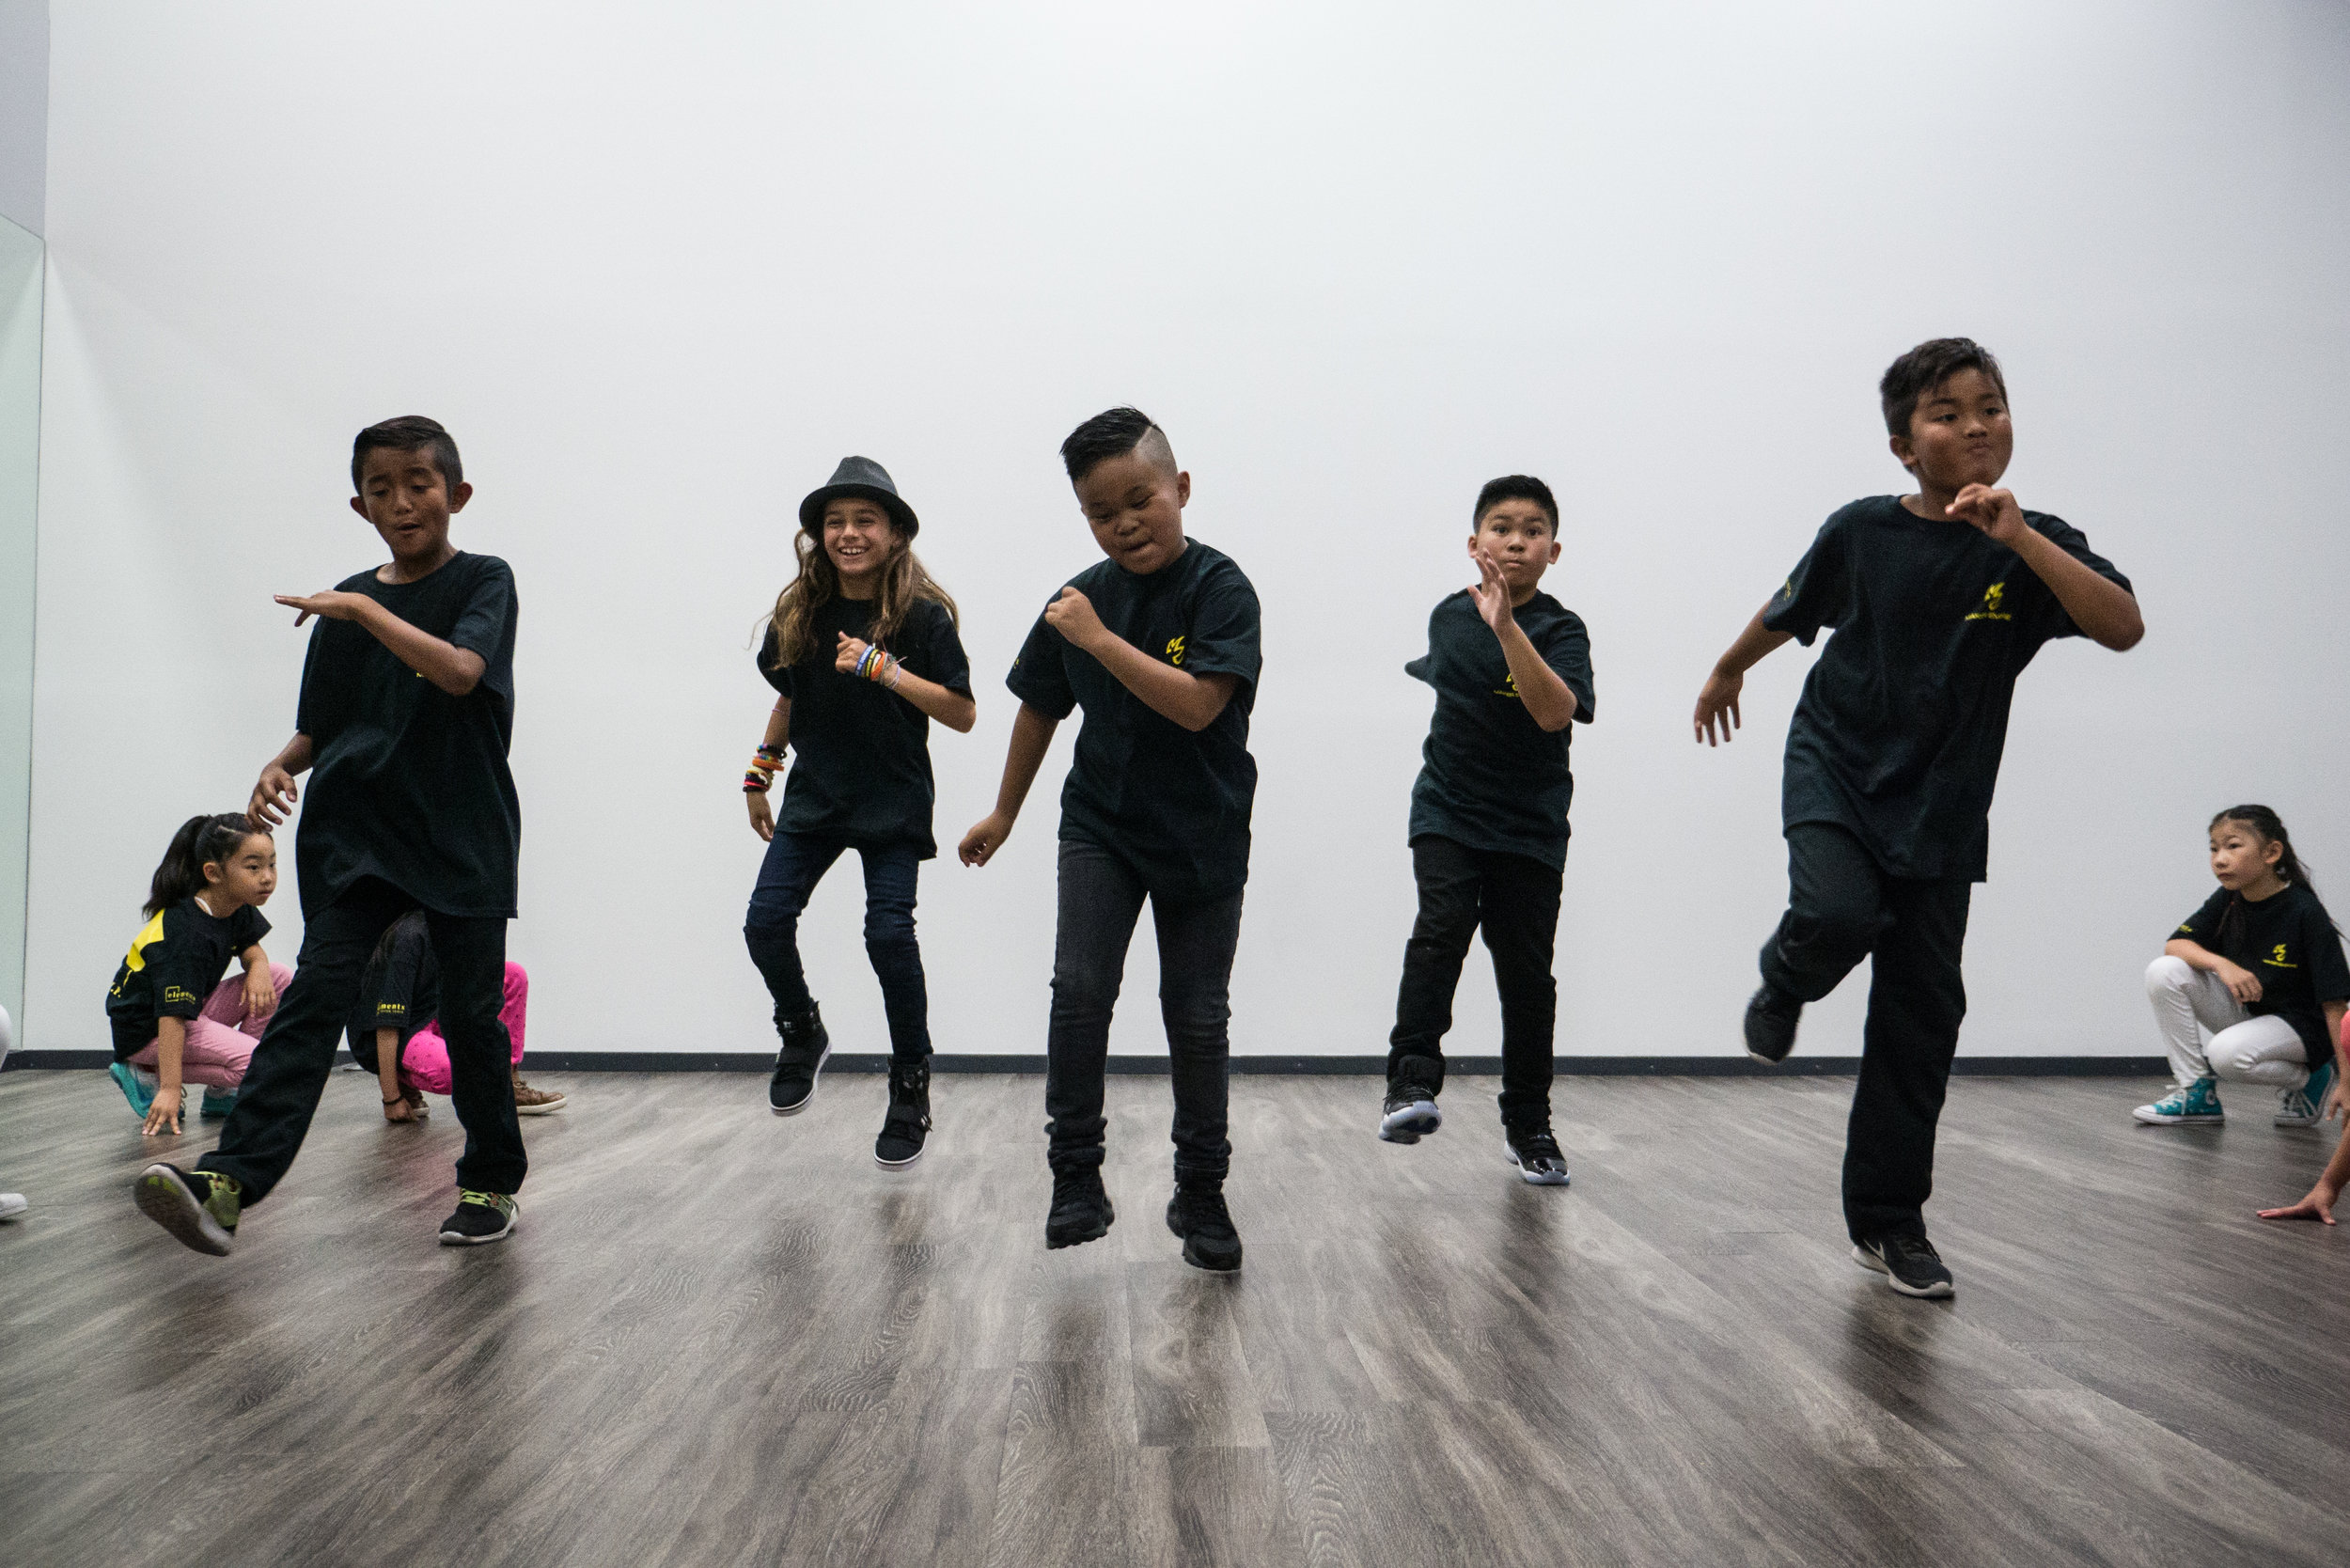 Students in a dance class mid-dance